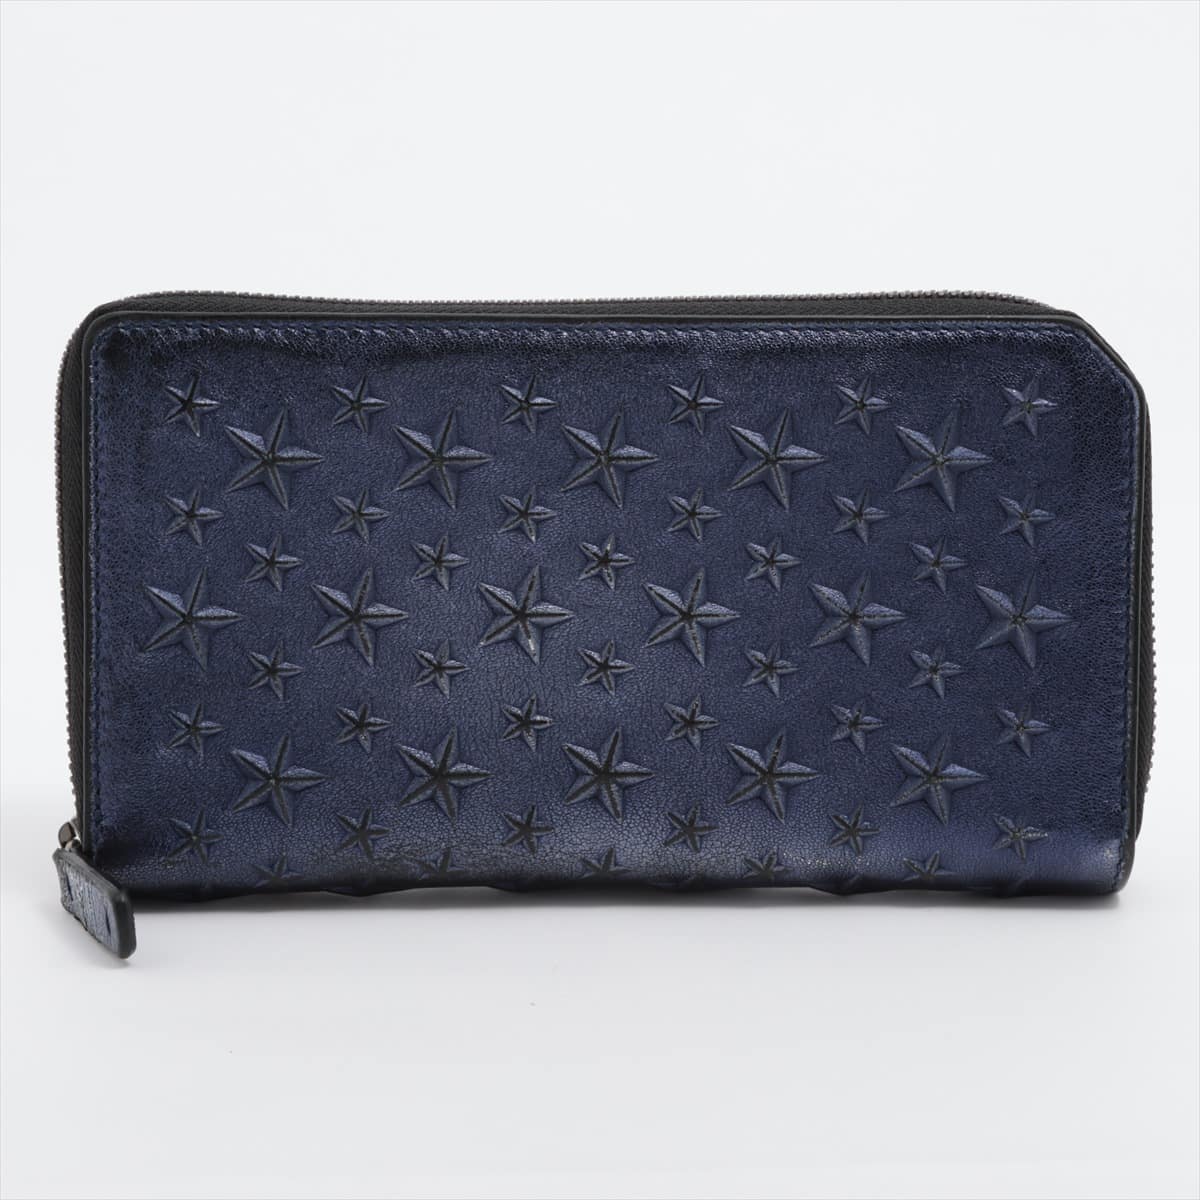 Jimmy Choo Star studs Leather Round-Zip-Wallet Navy blue There is pull deterioration and outer peeling